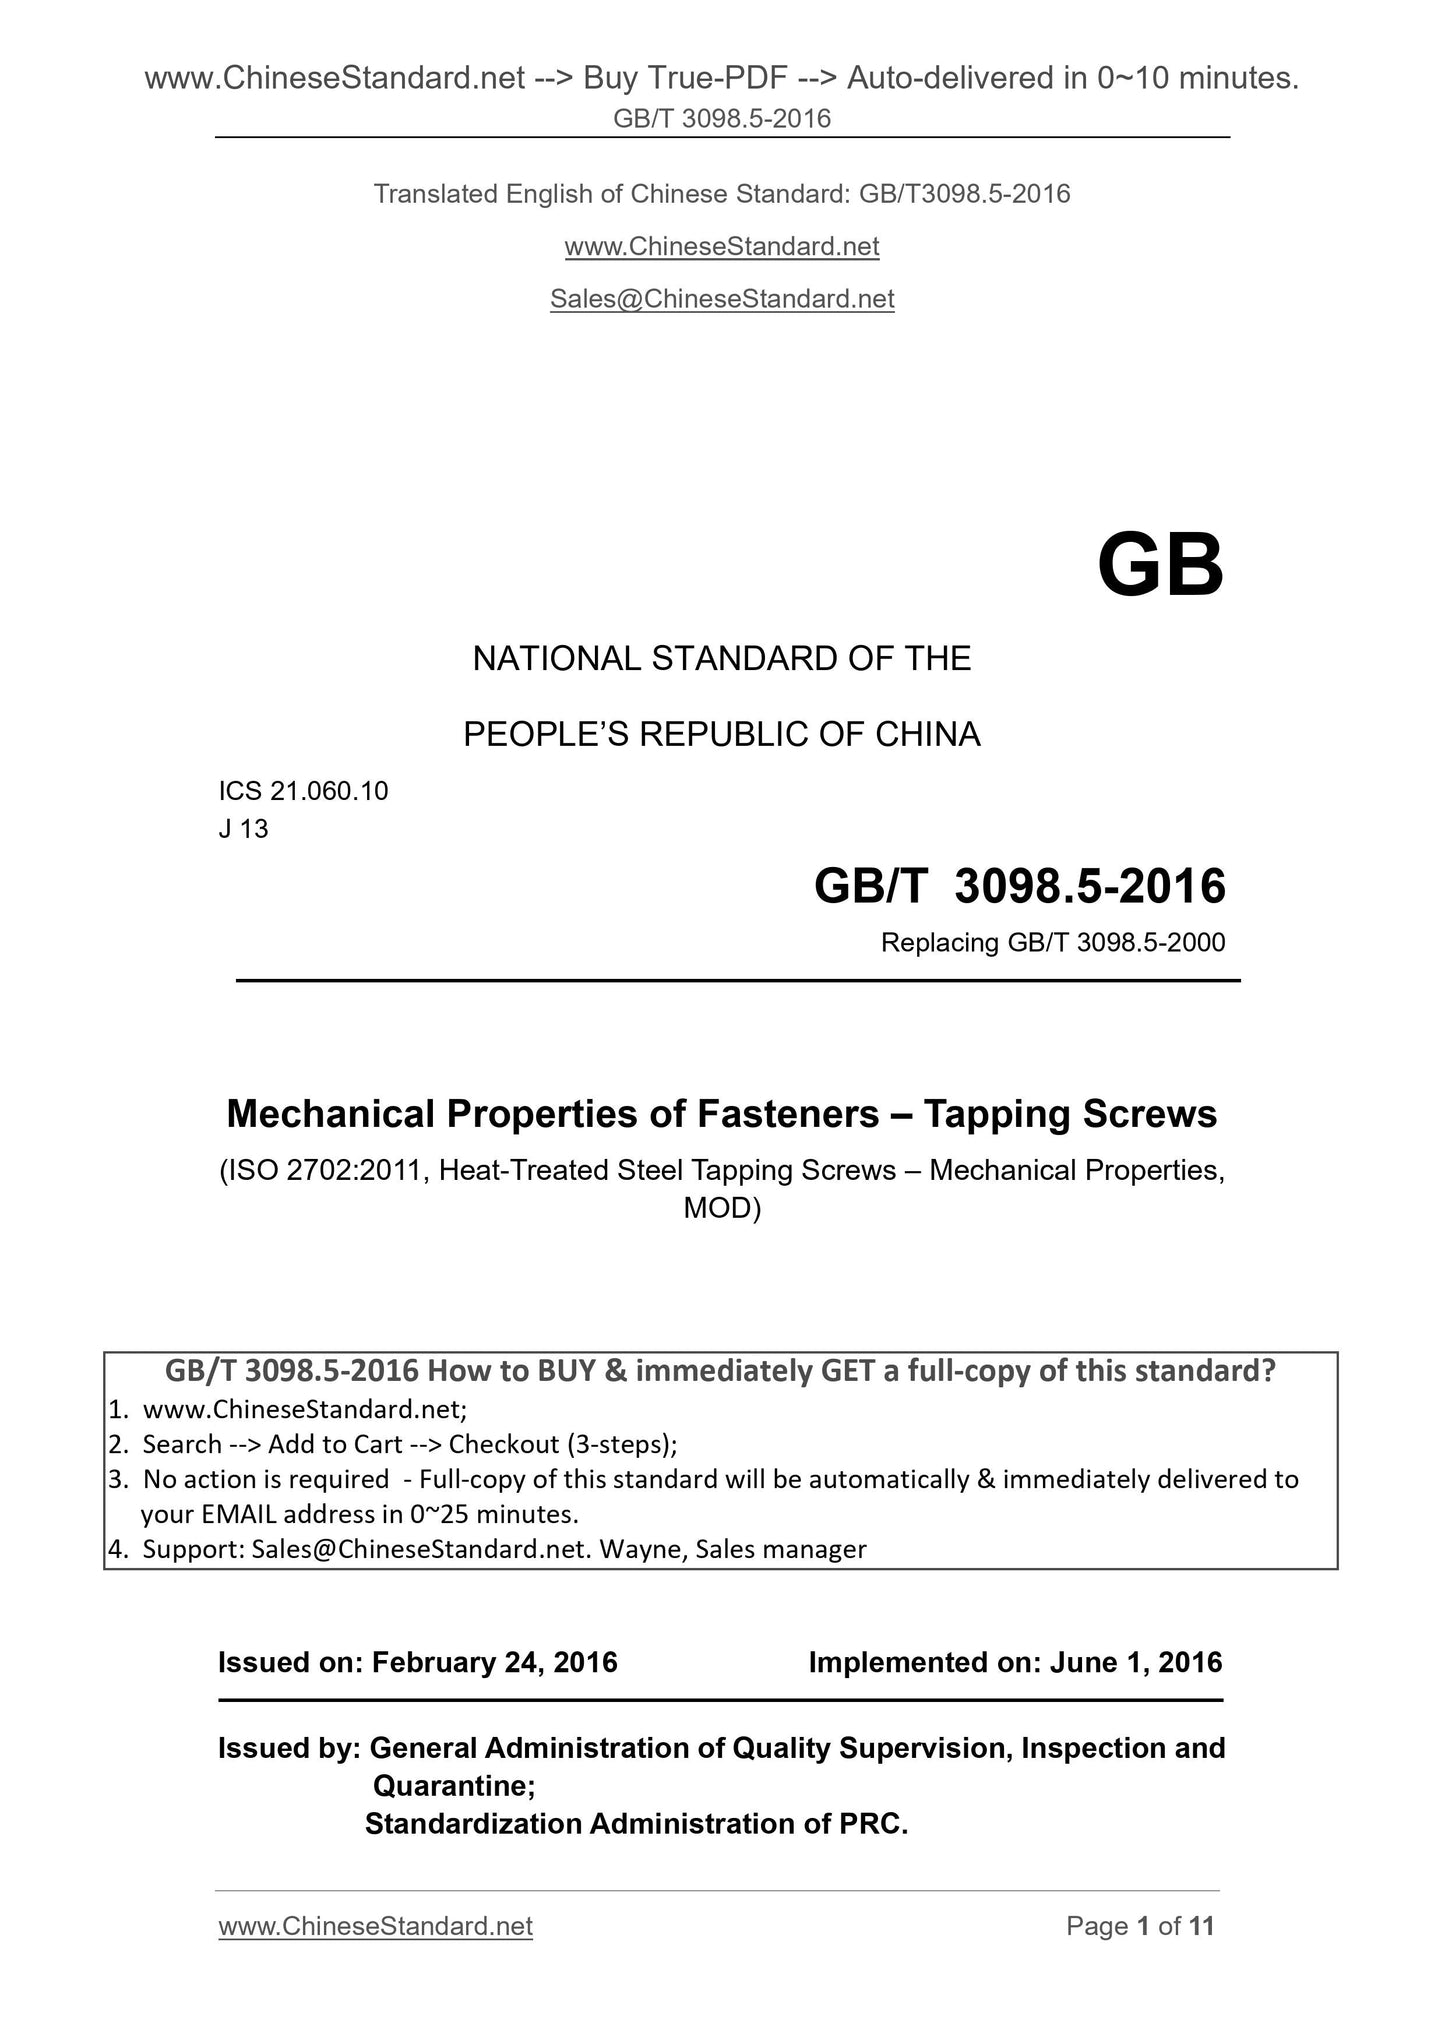 GB/T 3098.5-2016 Page 1